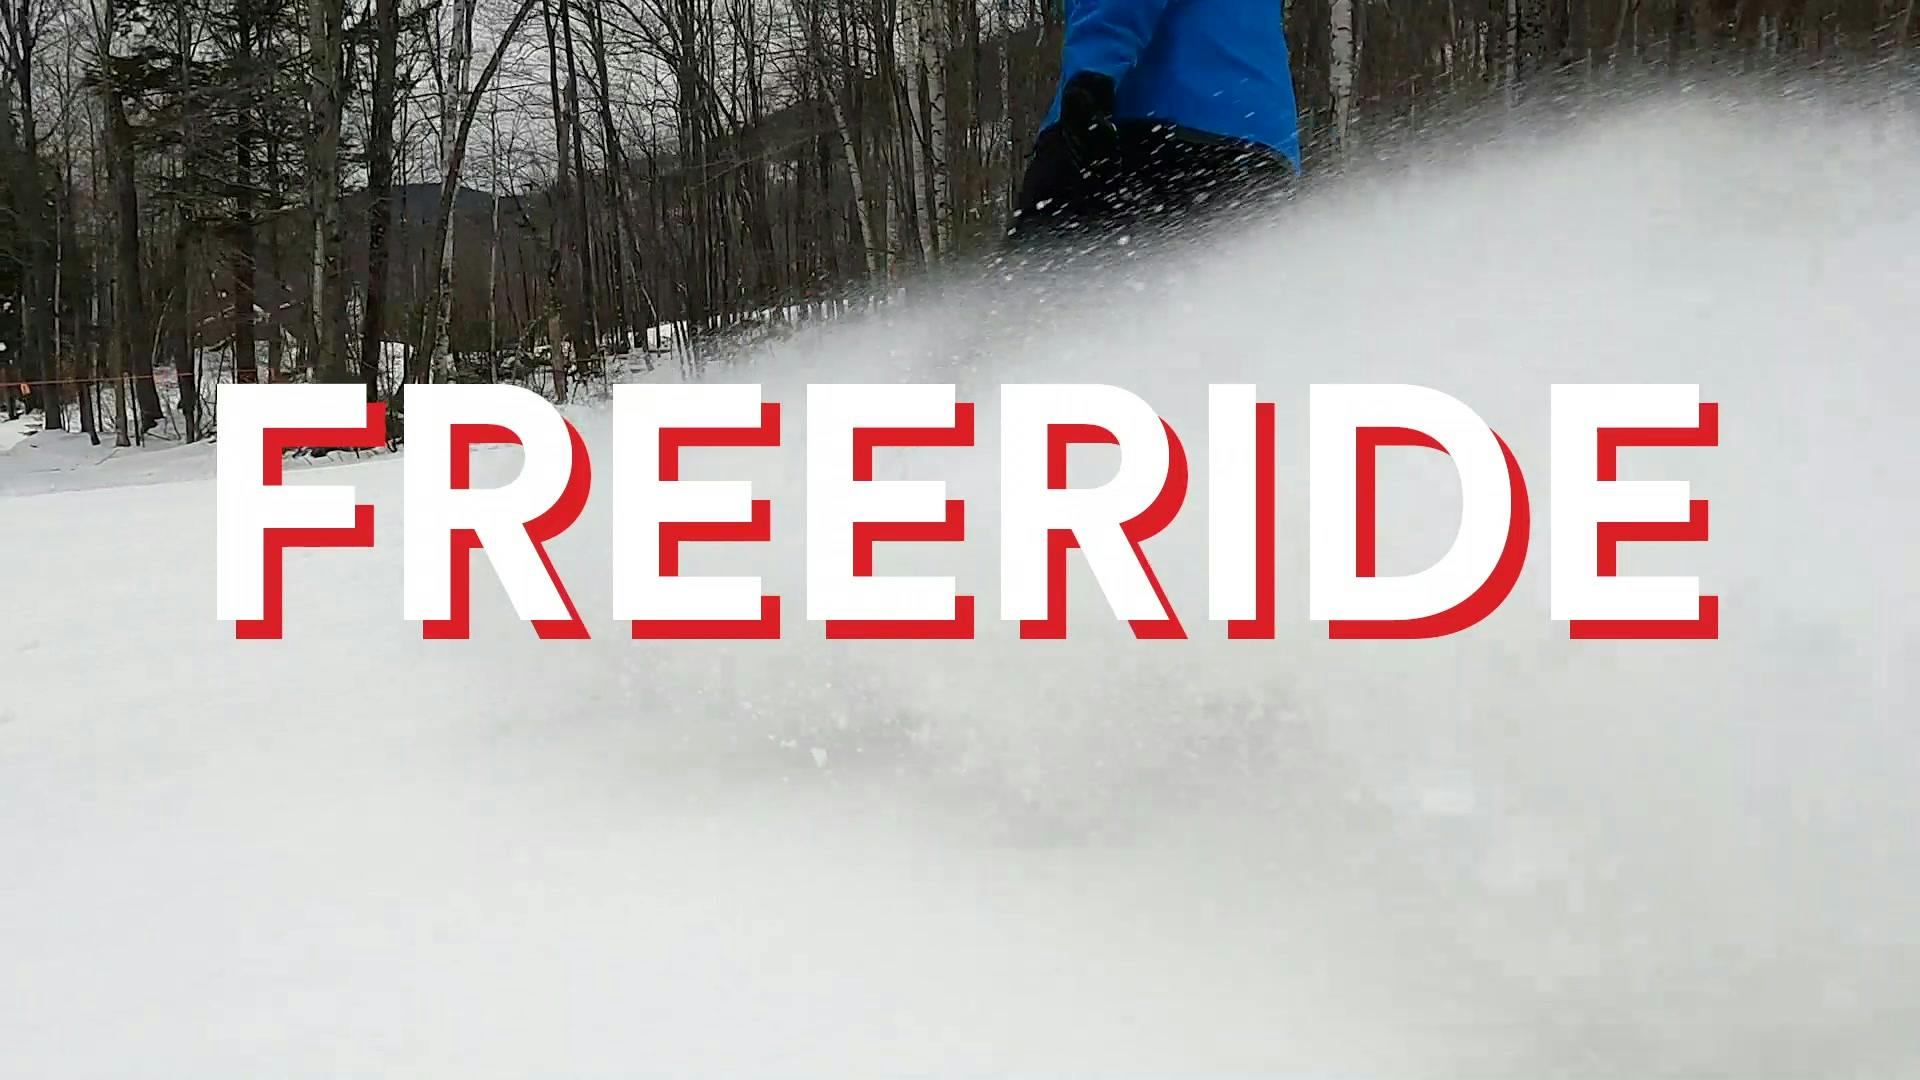 A snowboarder splashing a wave of snow with a "Freeride" graphic over the image